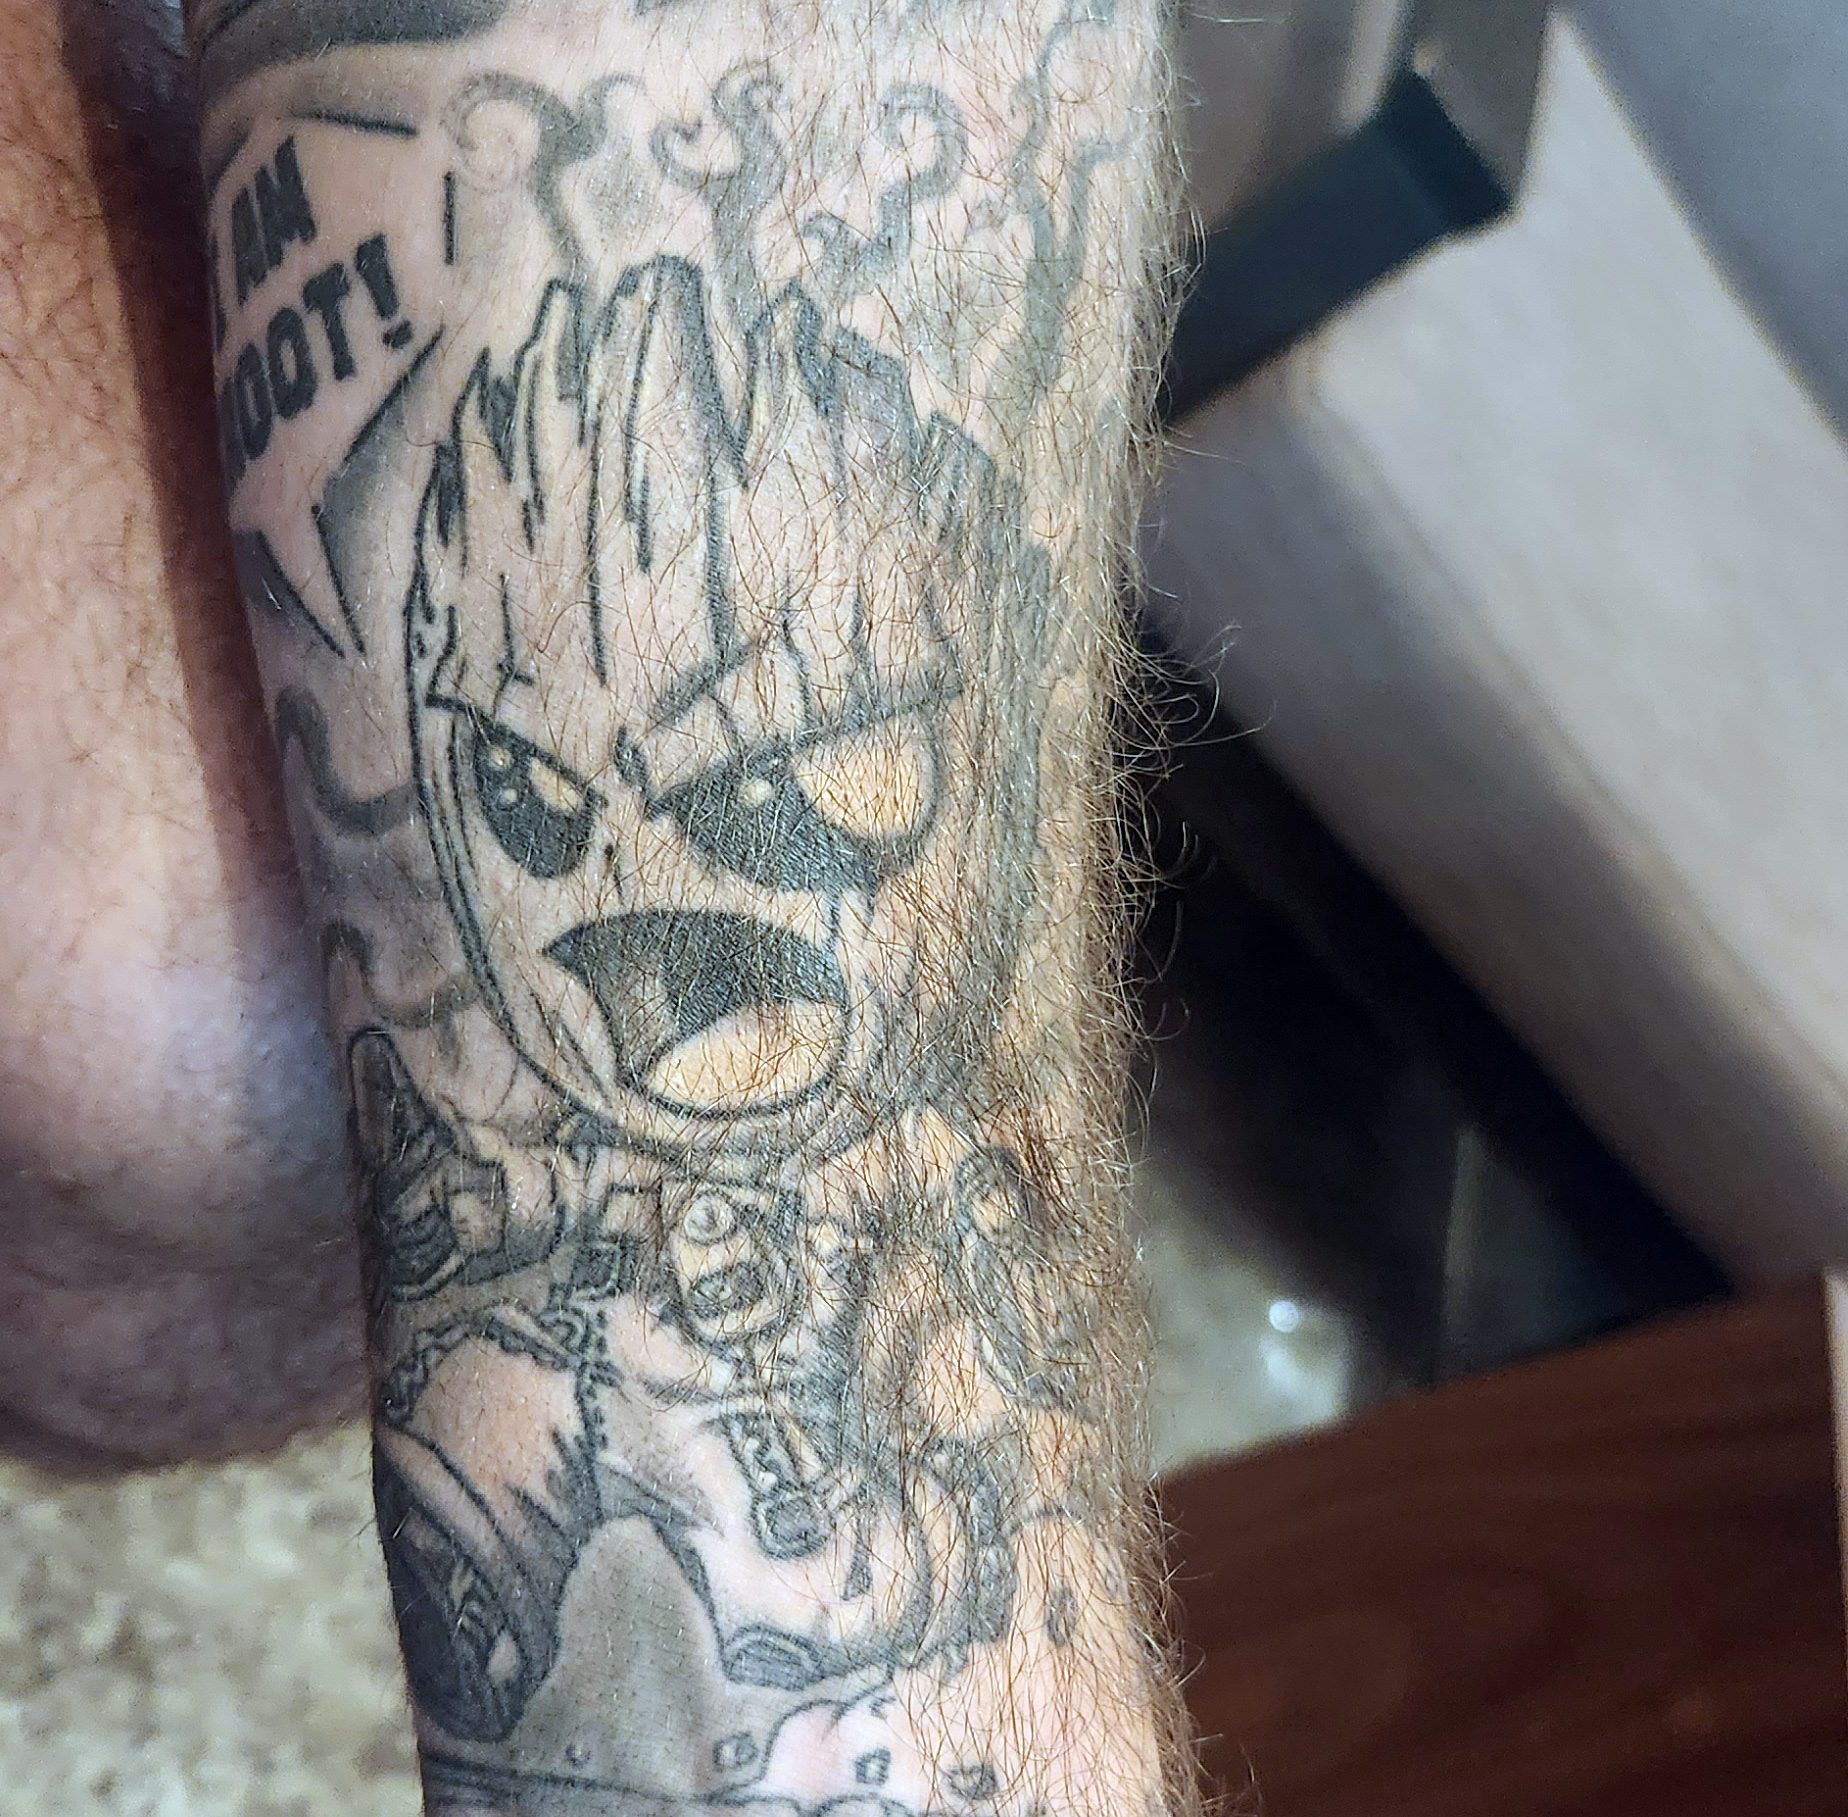 Photo of a tattoo of Baby Groot shouting "I Am Groot!"